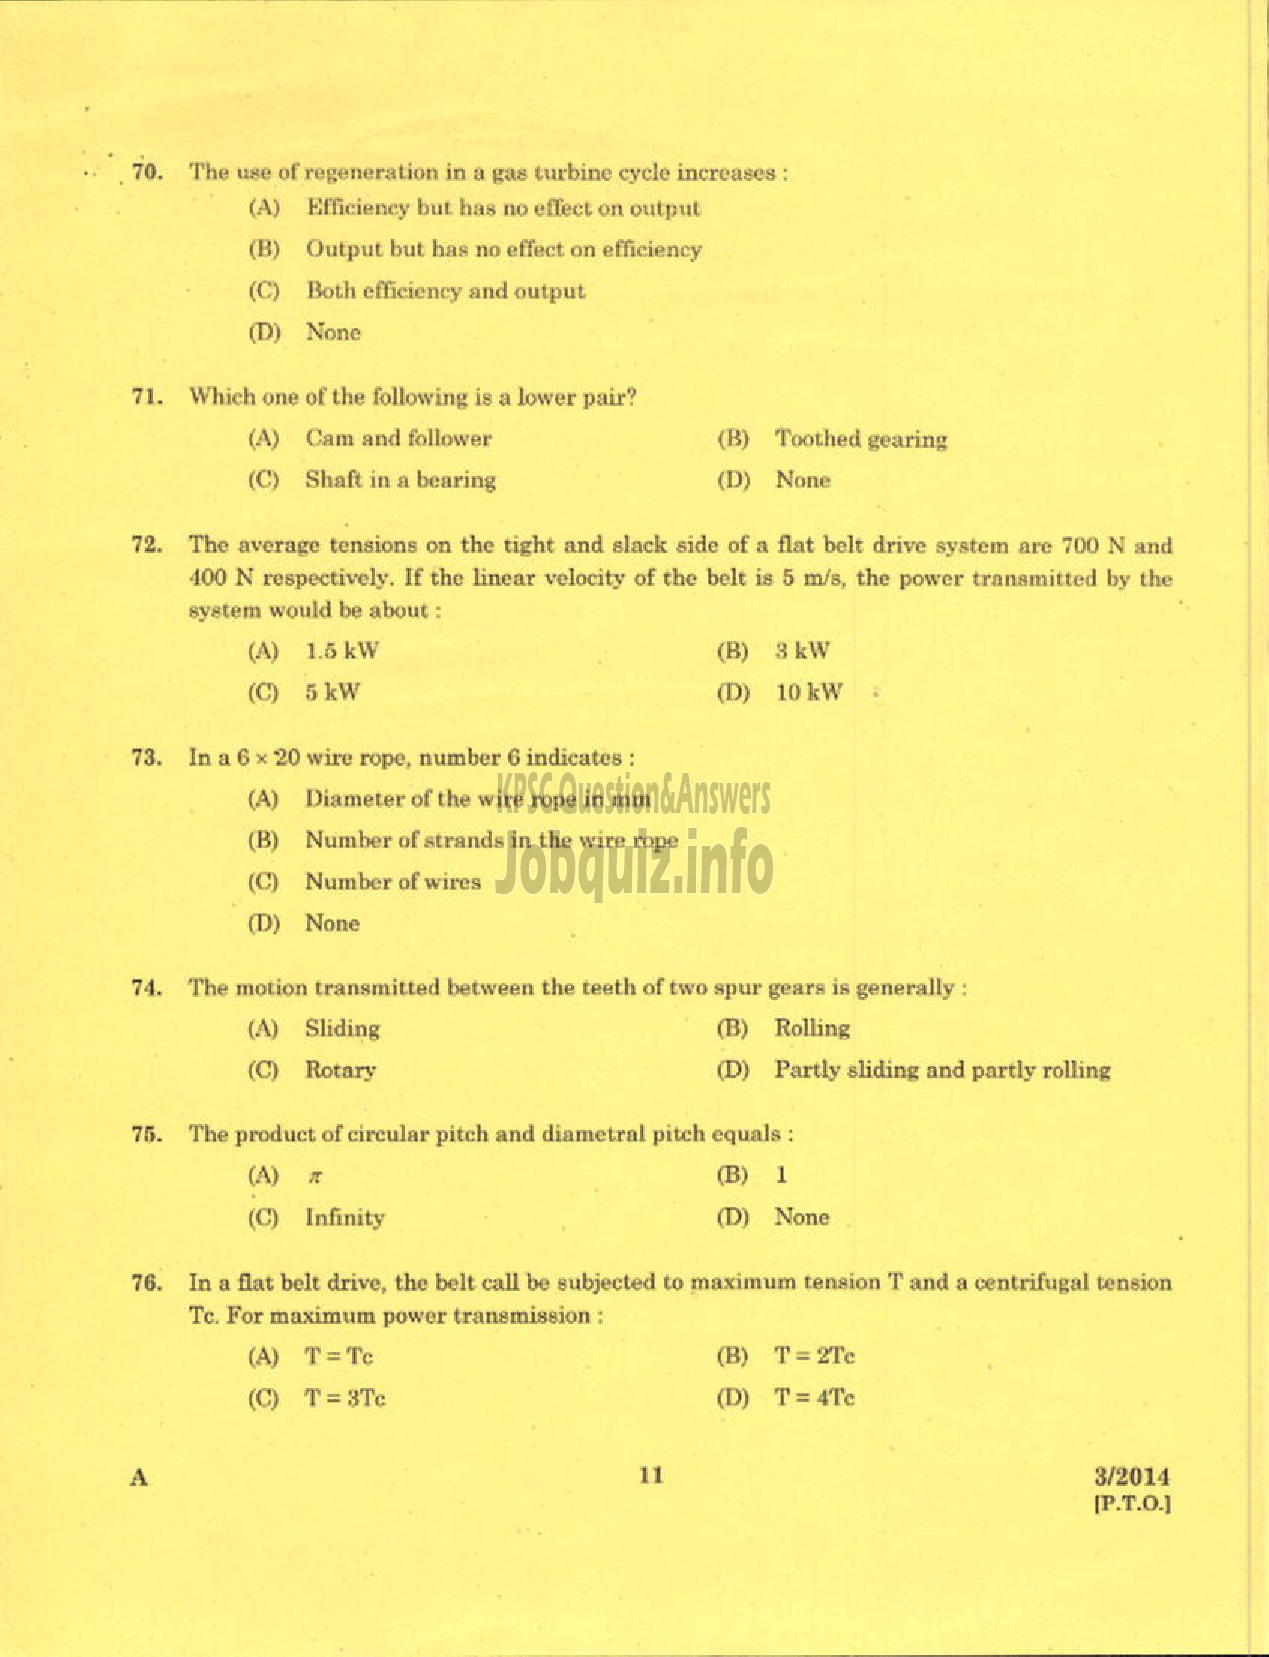 Kerala PSC Question Paper - LECTURER IN MACHANICAL ENGINEERING POLYTECHNICS TECHNICAL EDUCATION-9